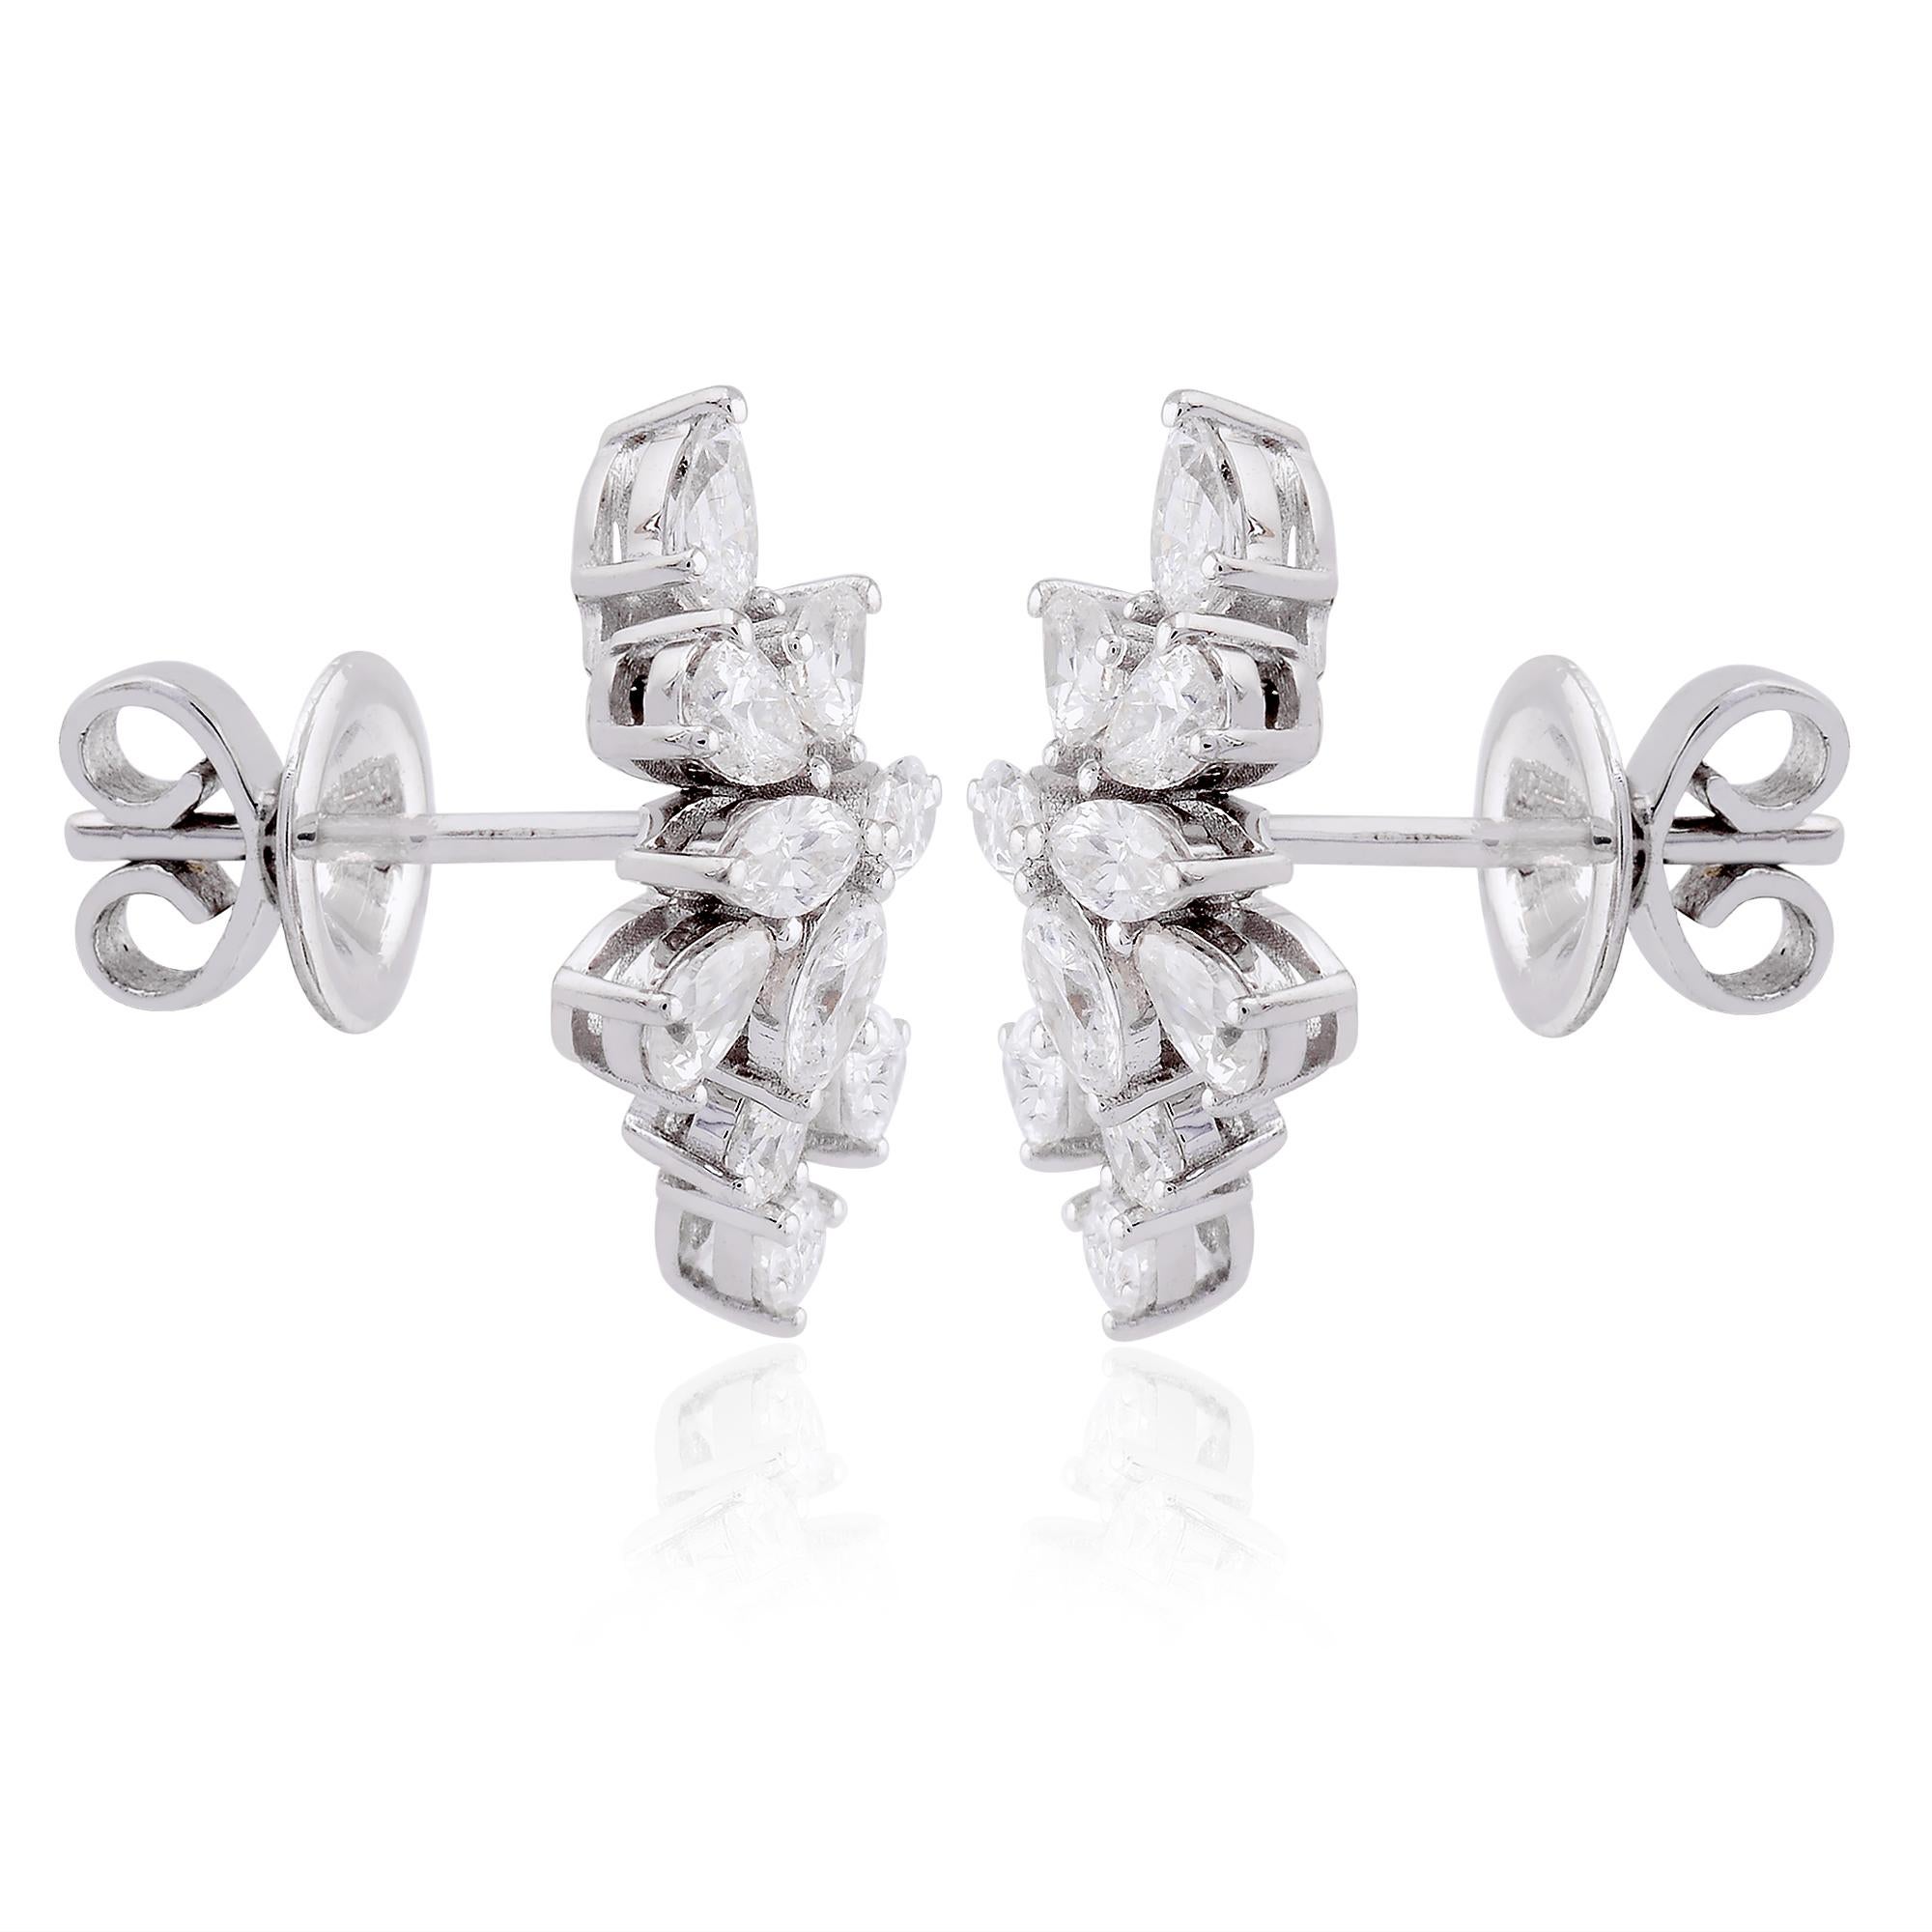 Expertly set in a classic four-prong setting, the diamonds are securely held in place while allowing maximum light to penetrate and enhance their brilliance. The sleek and timeless design of the earrings ensures that they will complement any